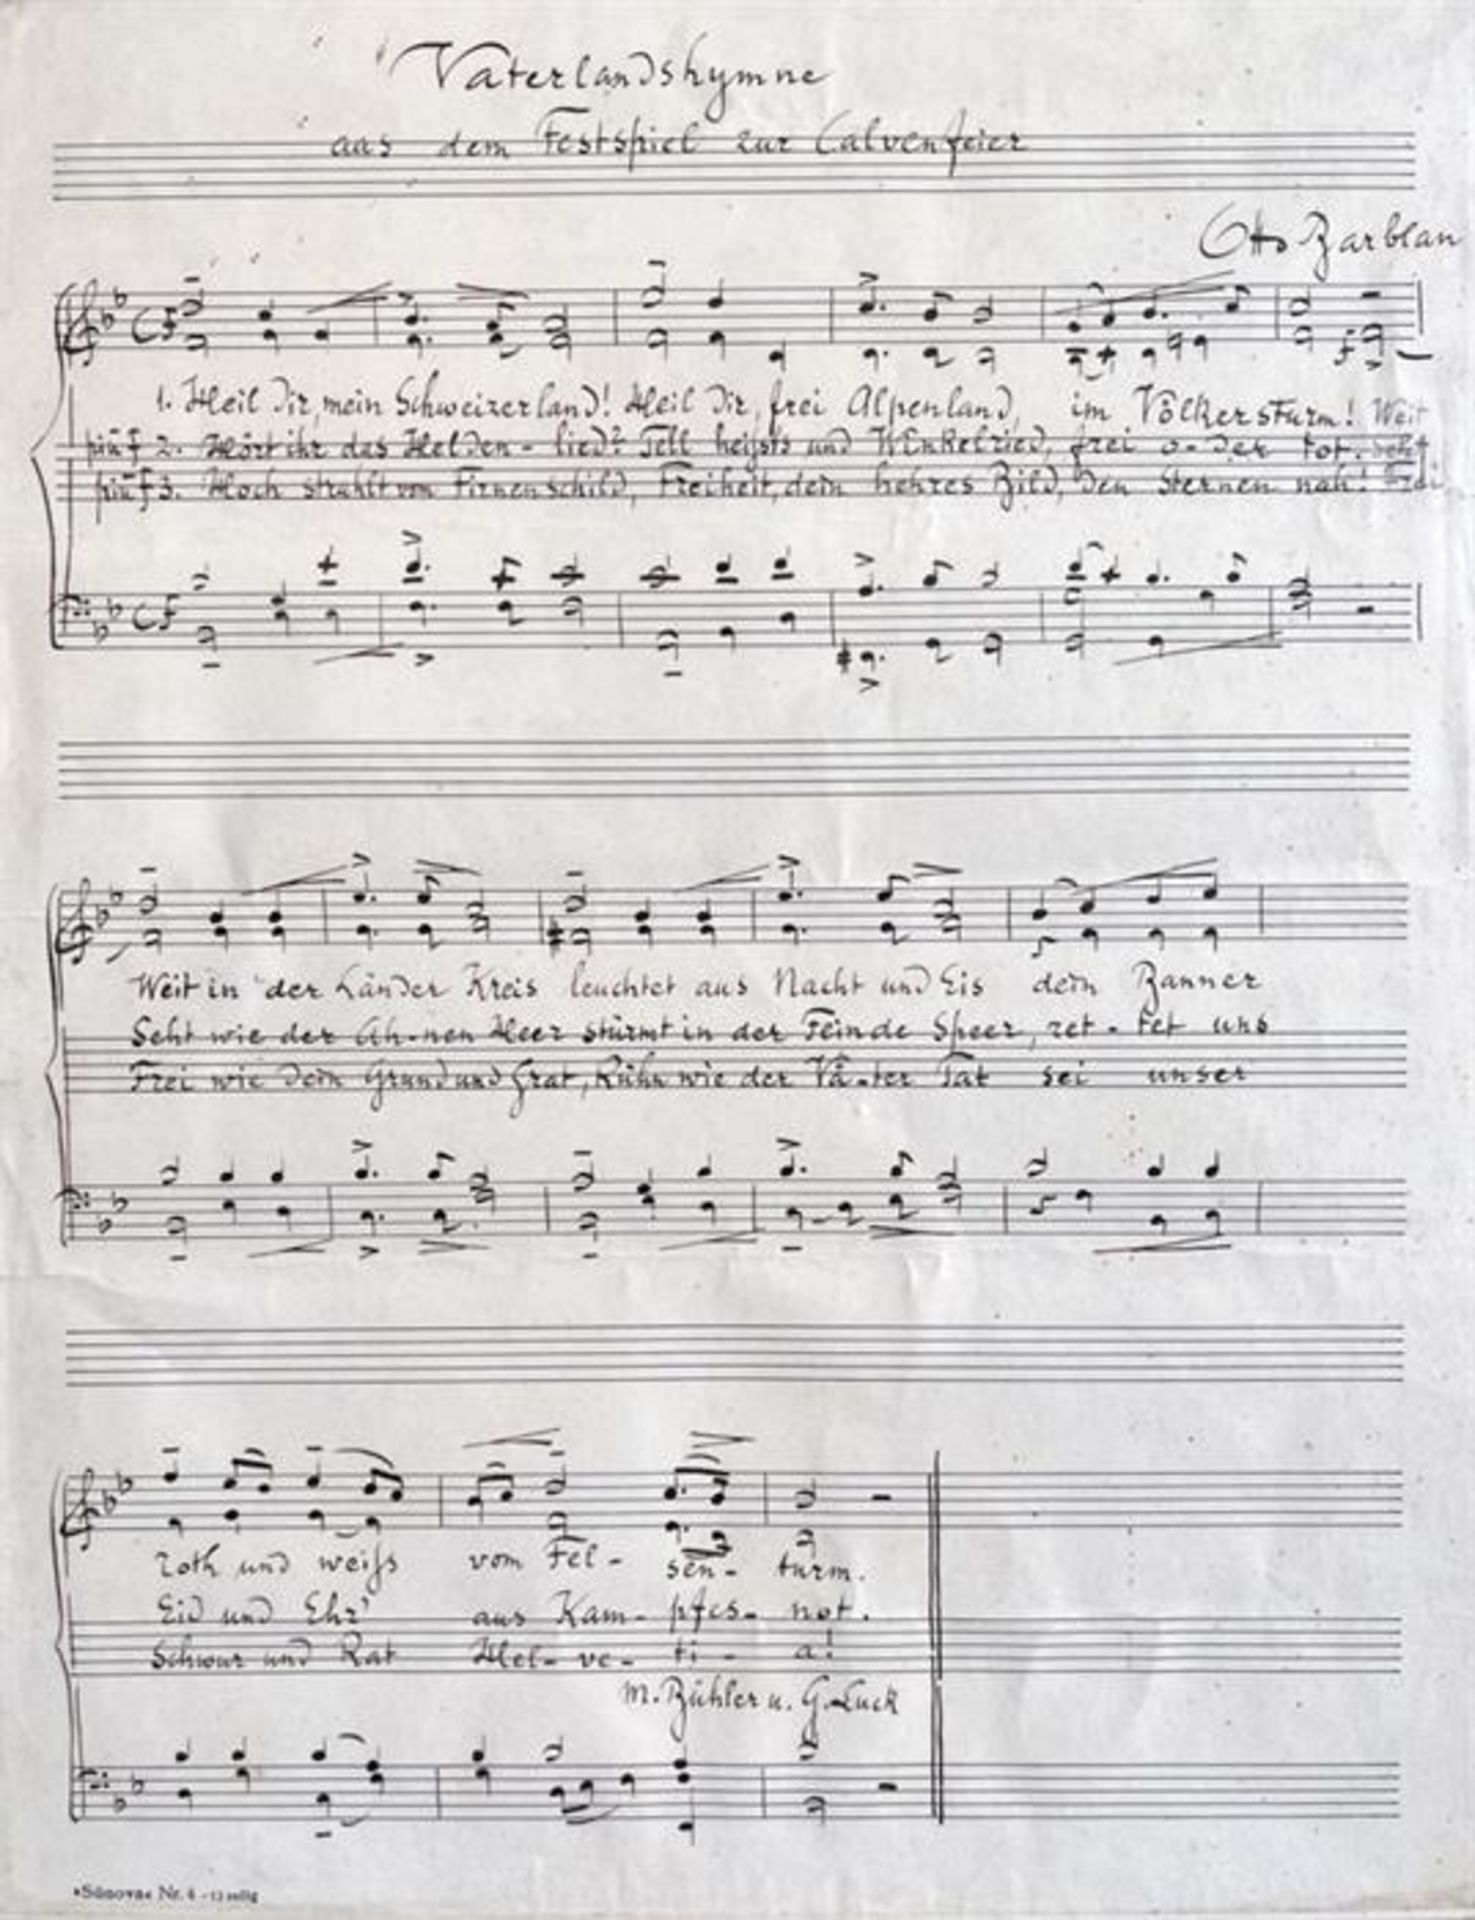 SHEET MUSIC BY SWISS COMPOSER OTTO BARBLAN (1860-1943) WITH THE FATHERLAND HYMN